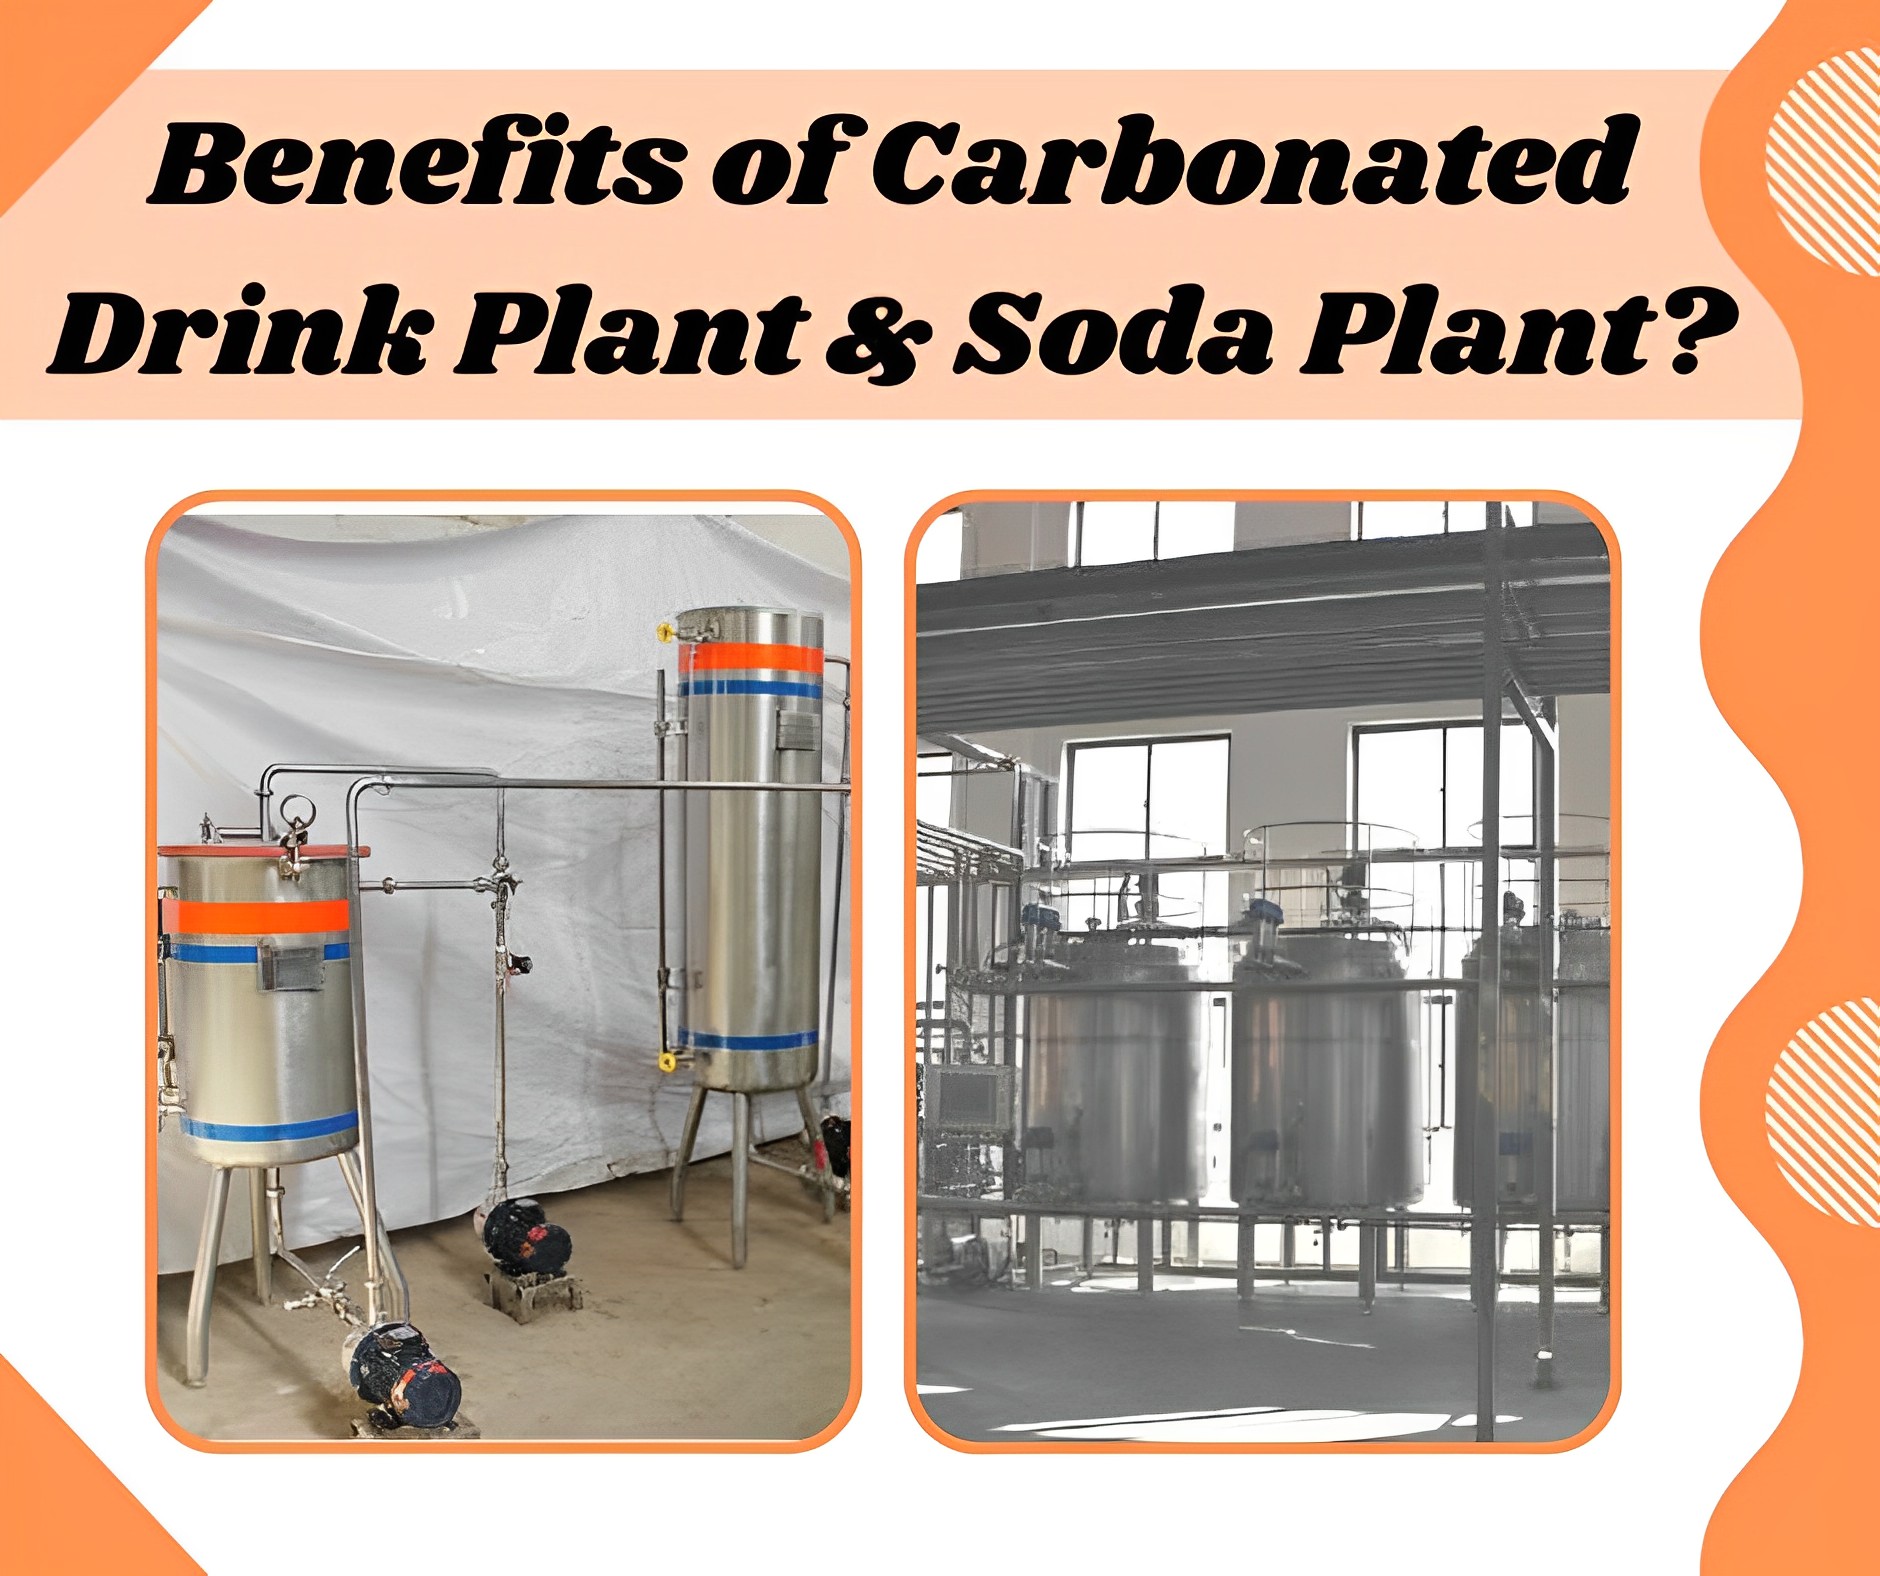 What are the Benefits of Carbonated Drink Plant & Soda Plant?